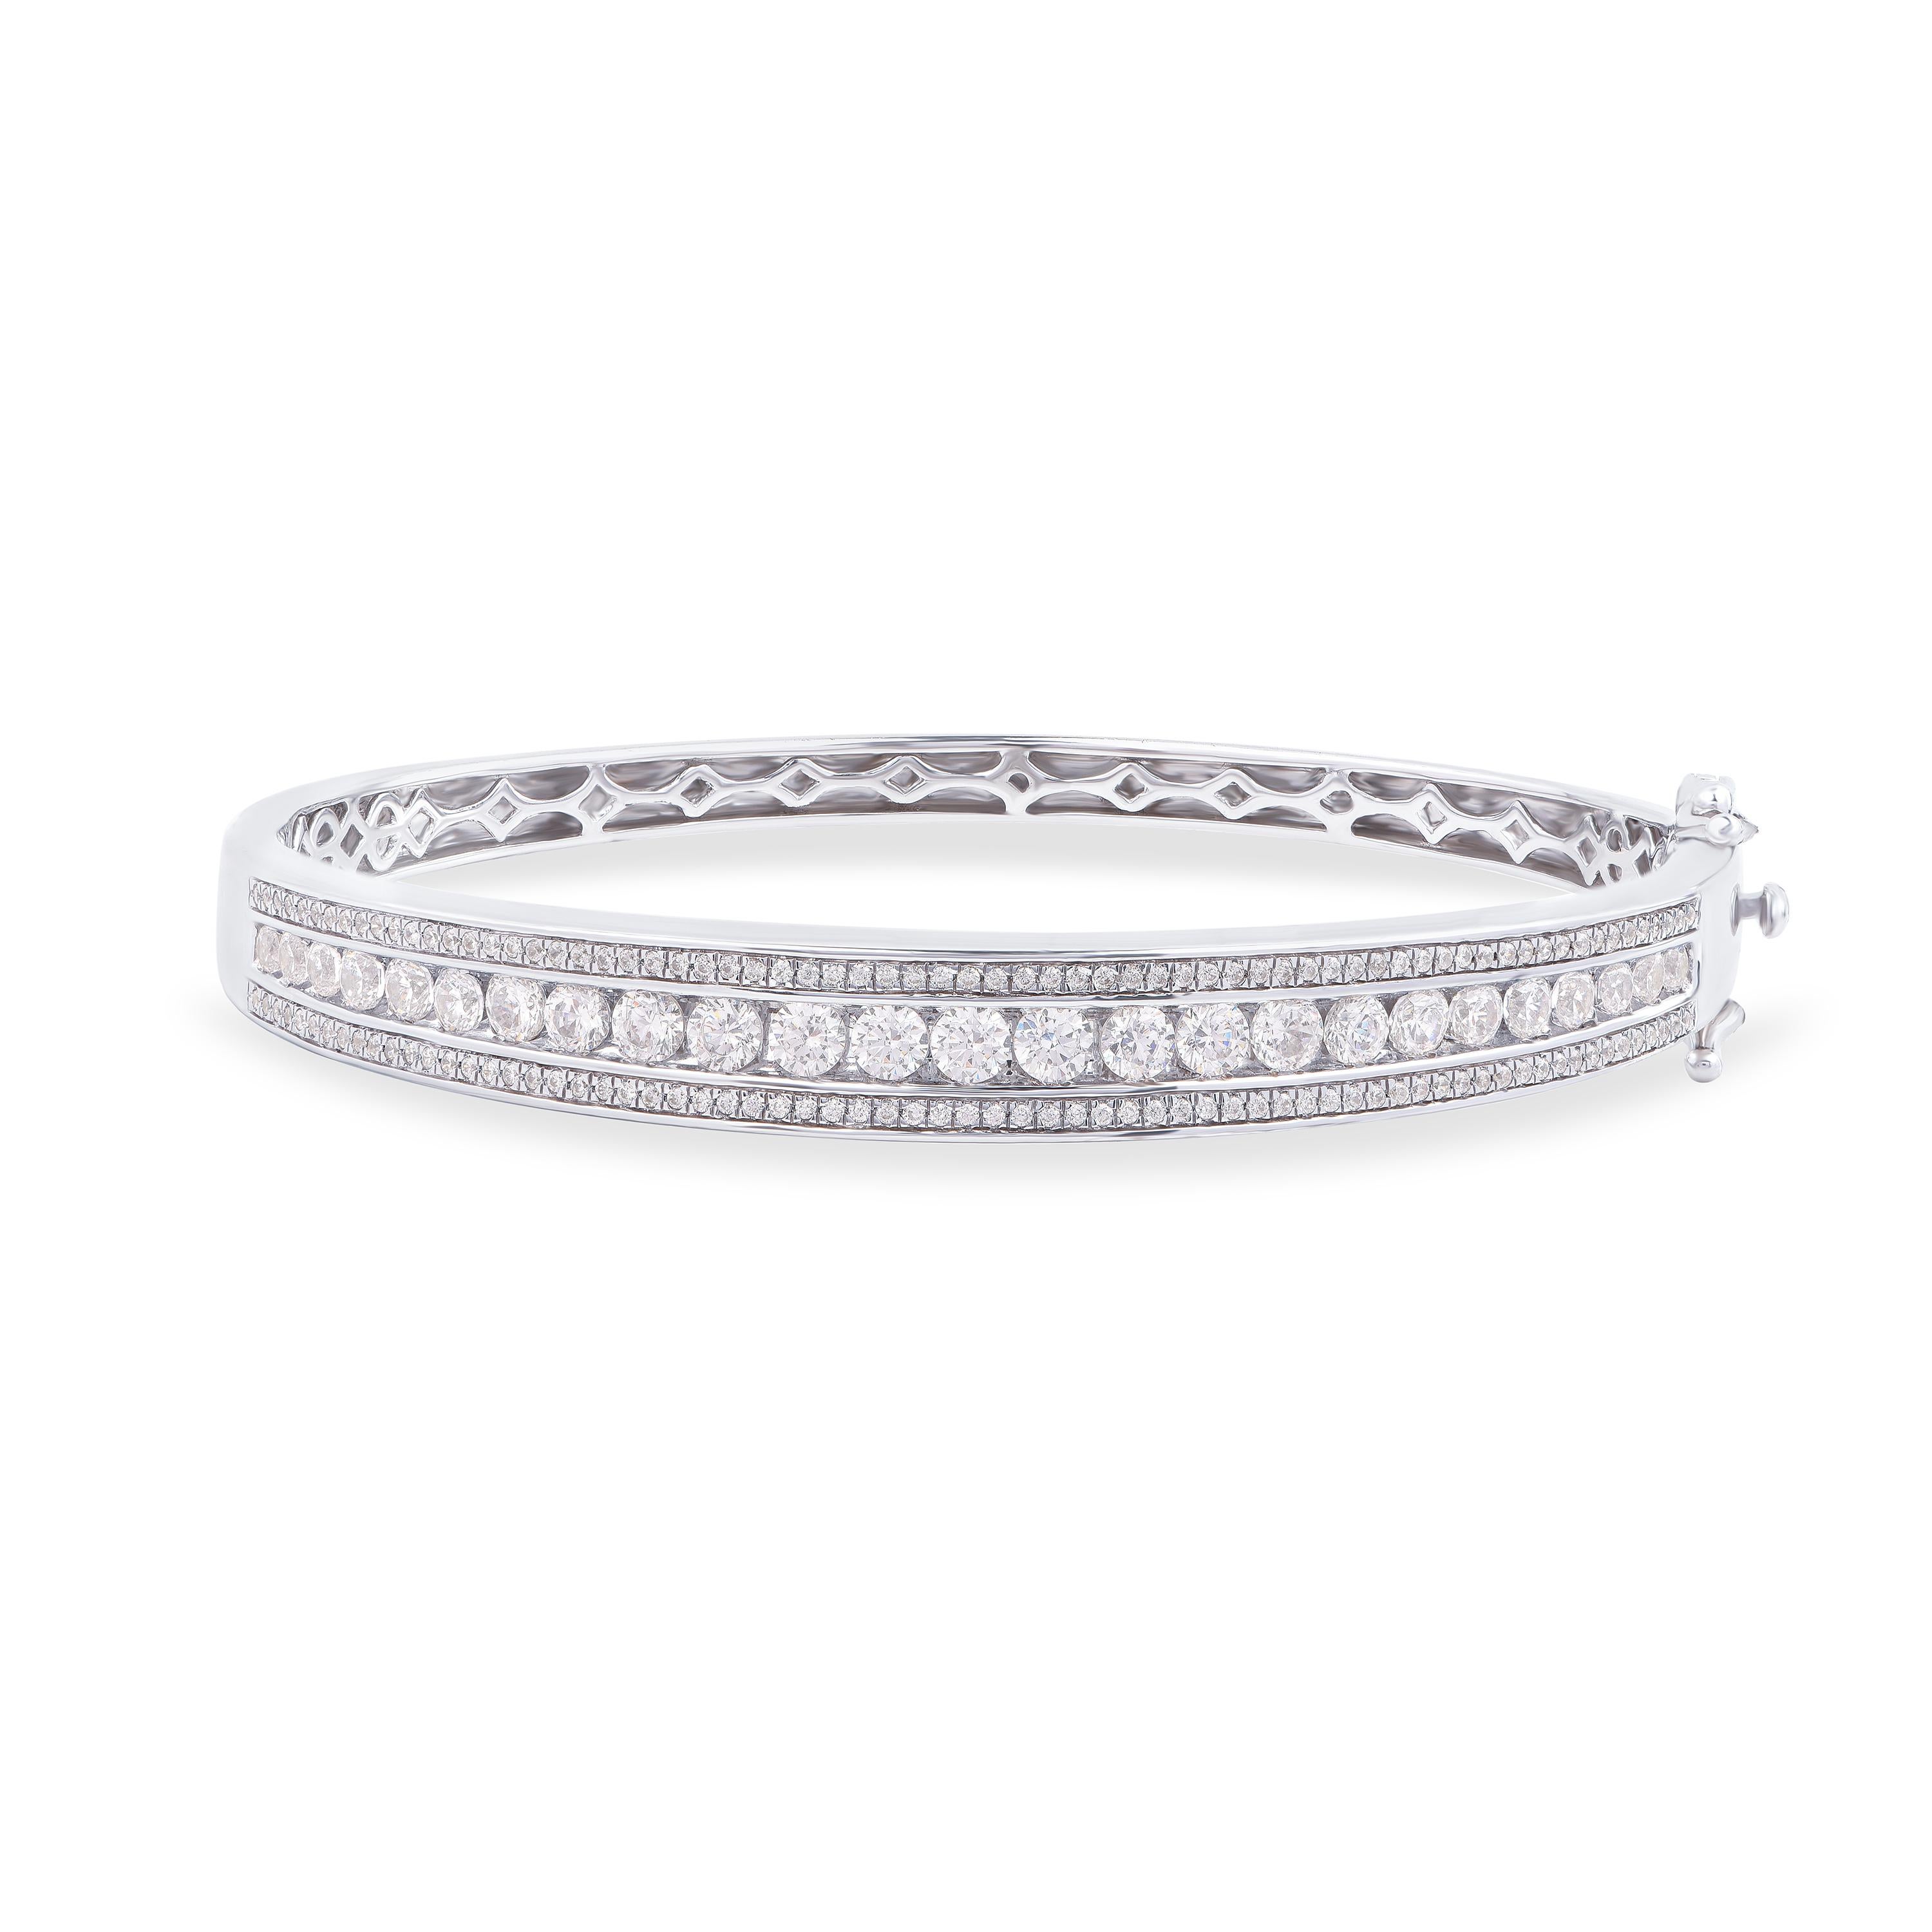 Scintillating with 163 brilliant-cut diamonds beautifully set in nick setting and crafted in 18-karat white gold. The diamonds are graded H-I Color, I2 Clarity. This diamond bangle is a perfect accompaniment for your evening look. 

This piece is